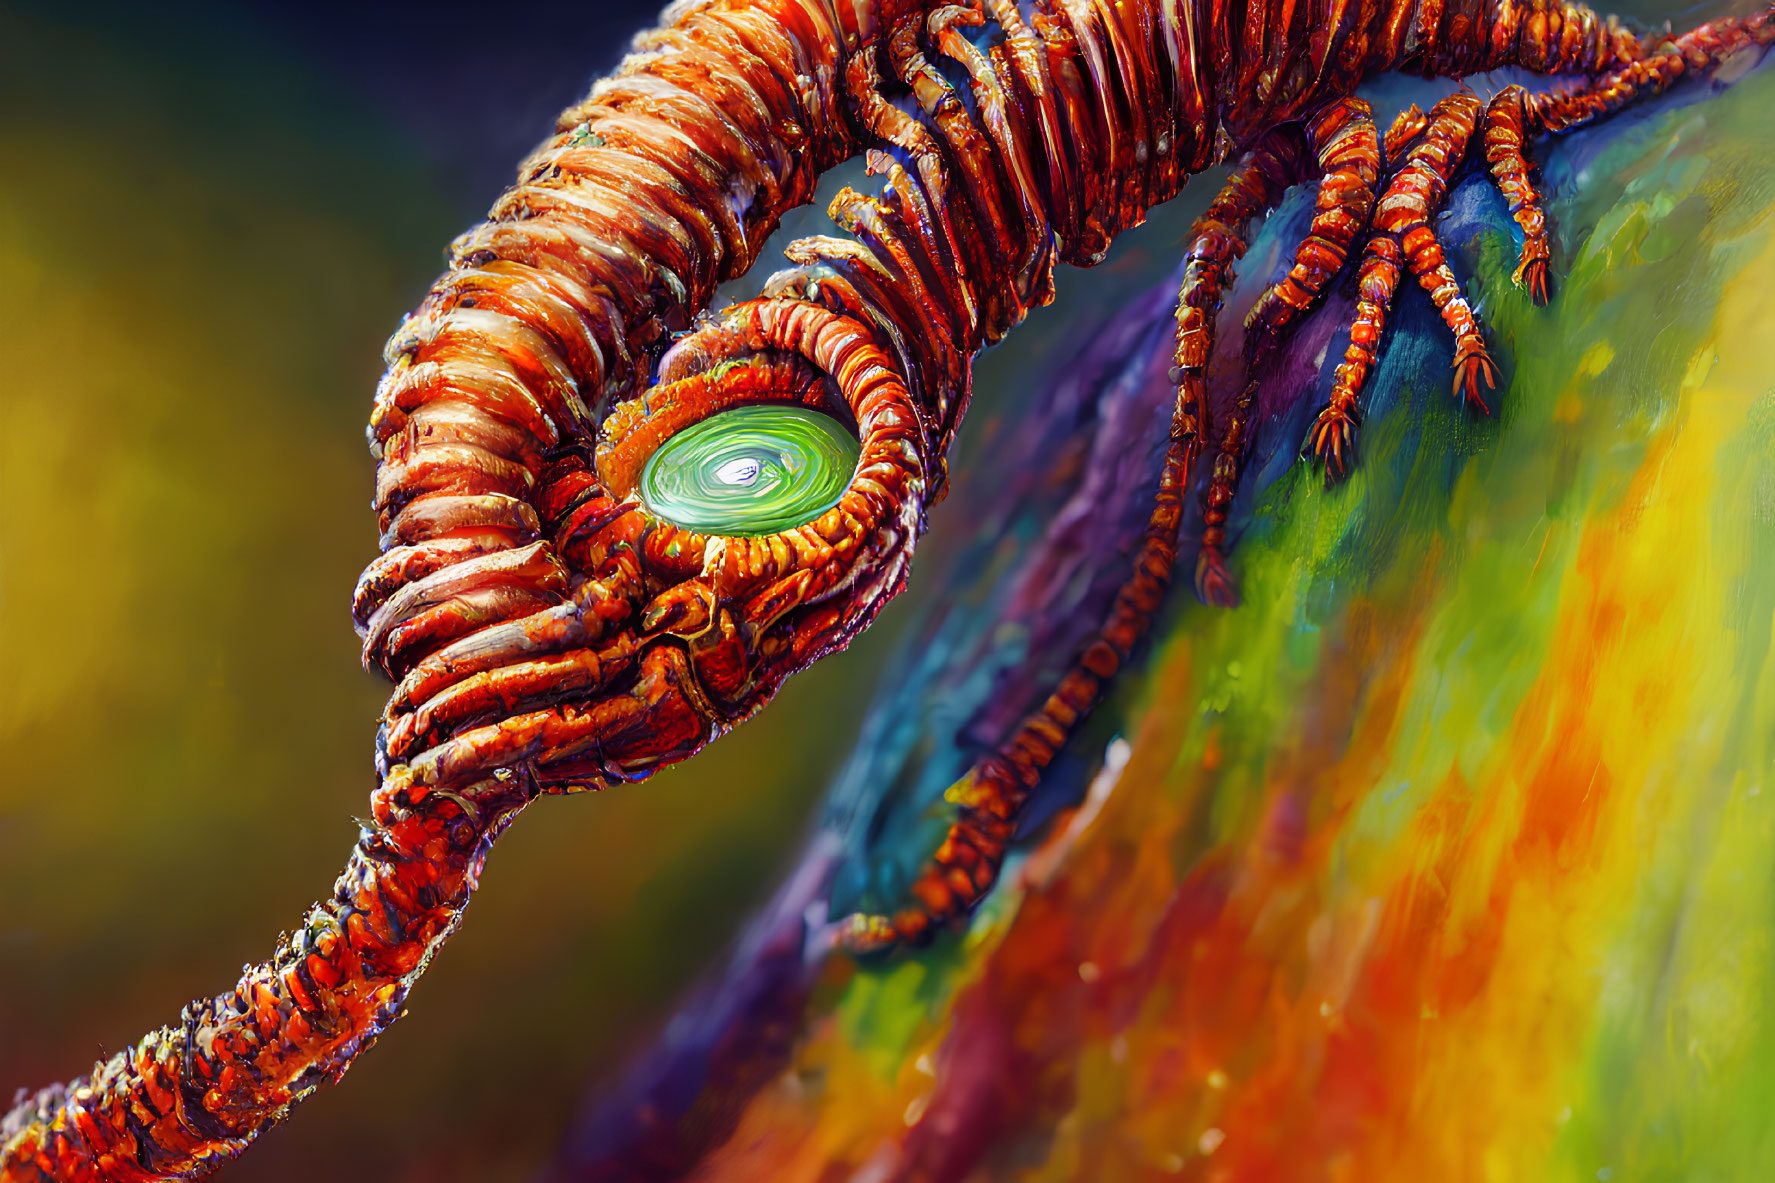 Colorful digital artwork: Spiral creature with central eye and limb-like extensions